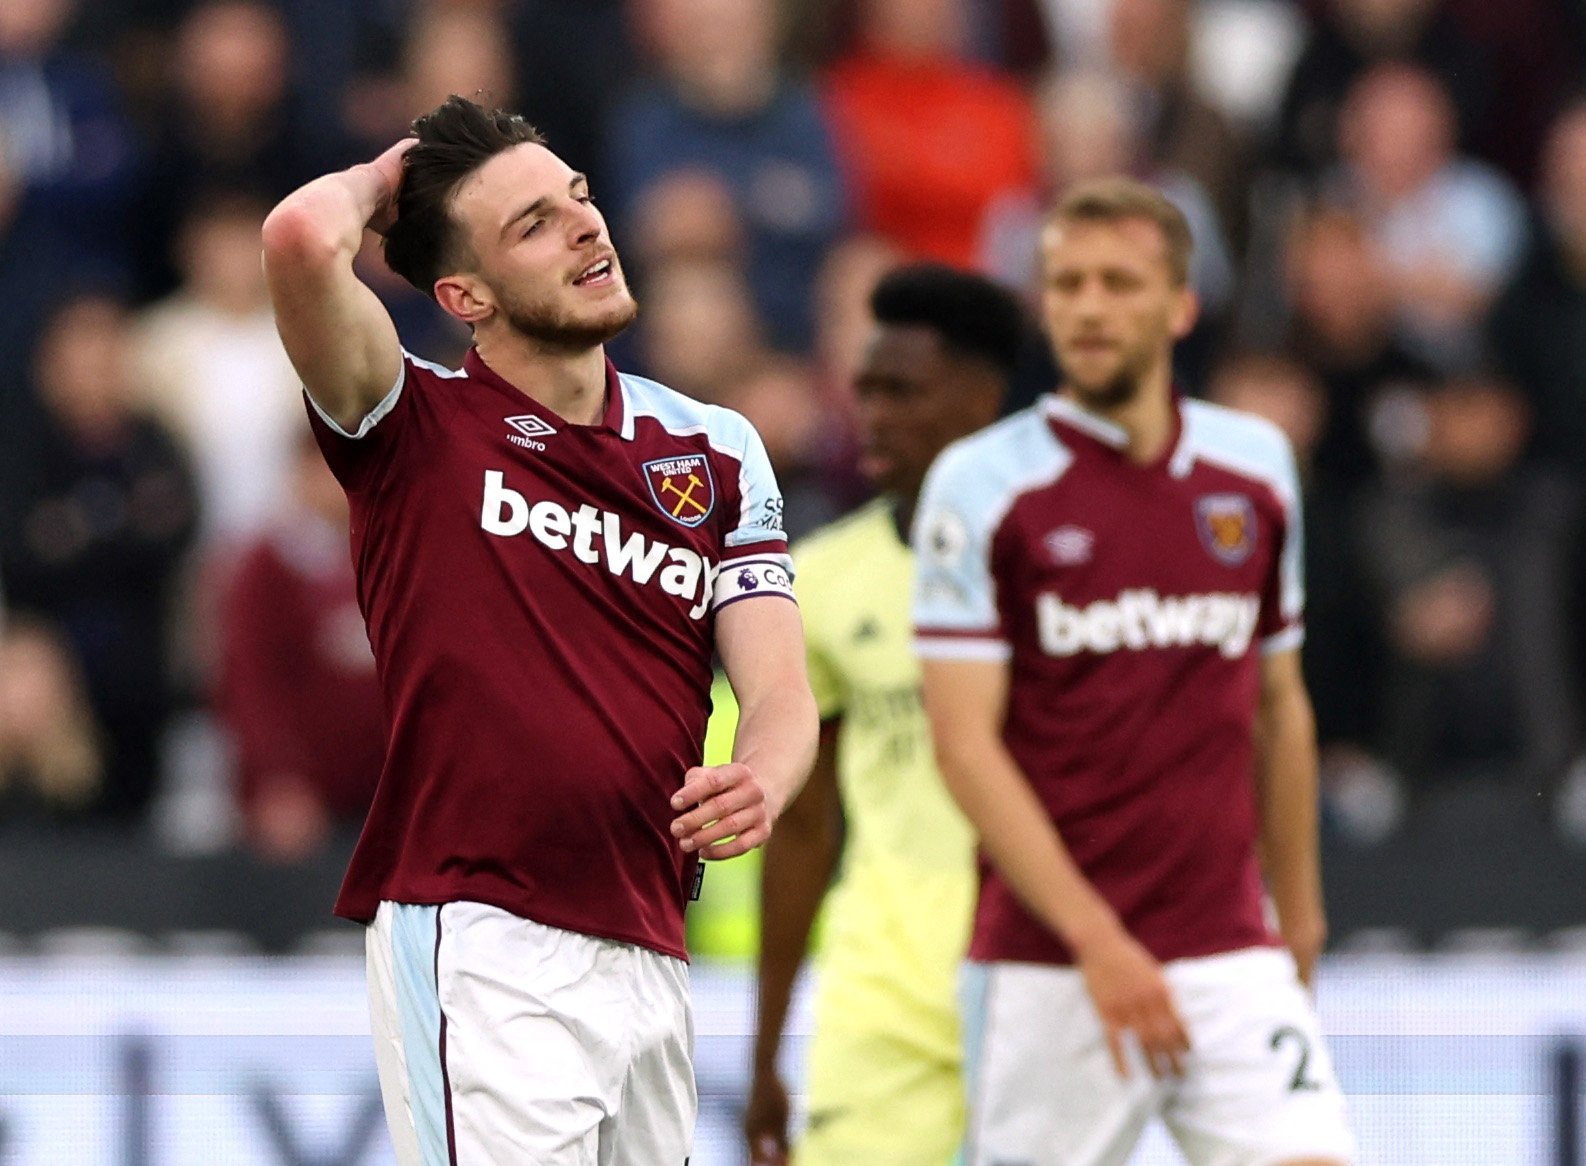 'I genuinely believe now' - Sky Sports man shares what 'West Ham coaches' have said about Rice